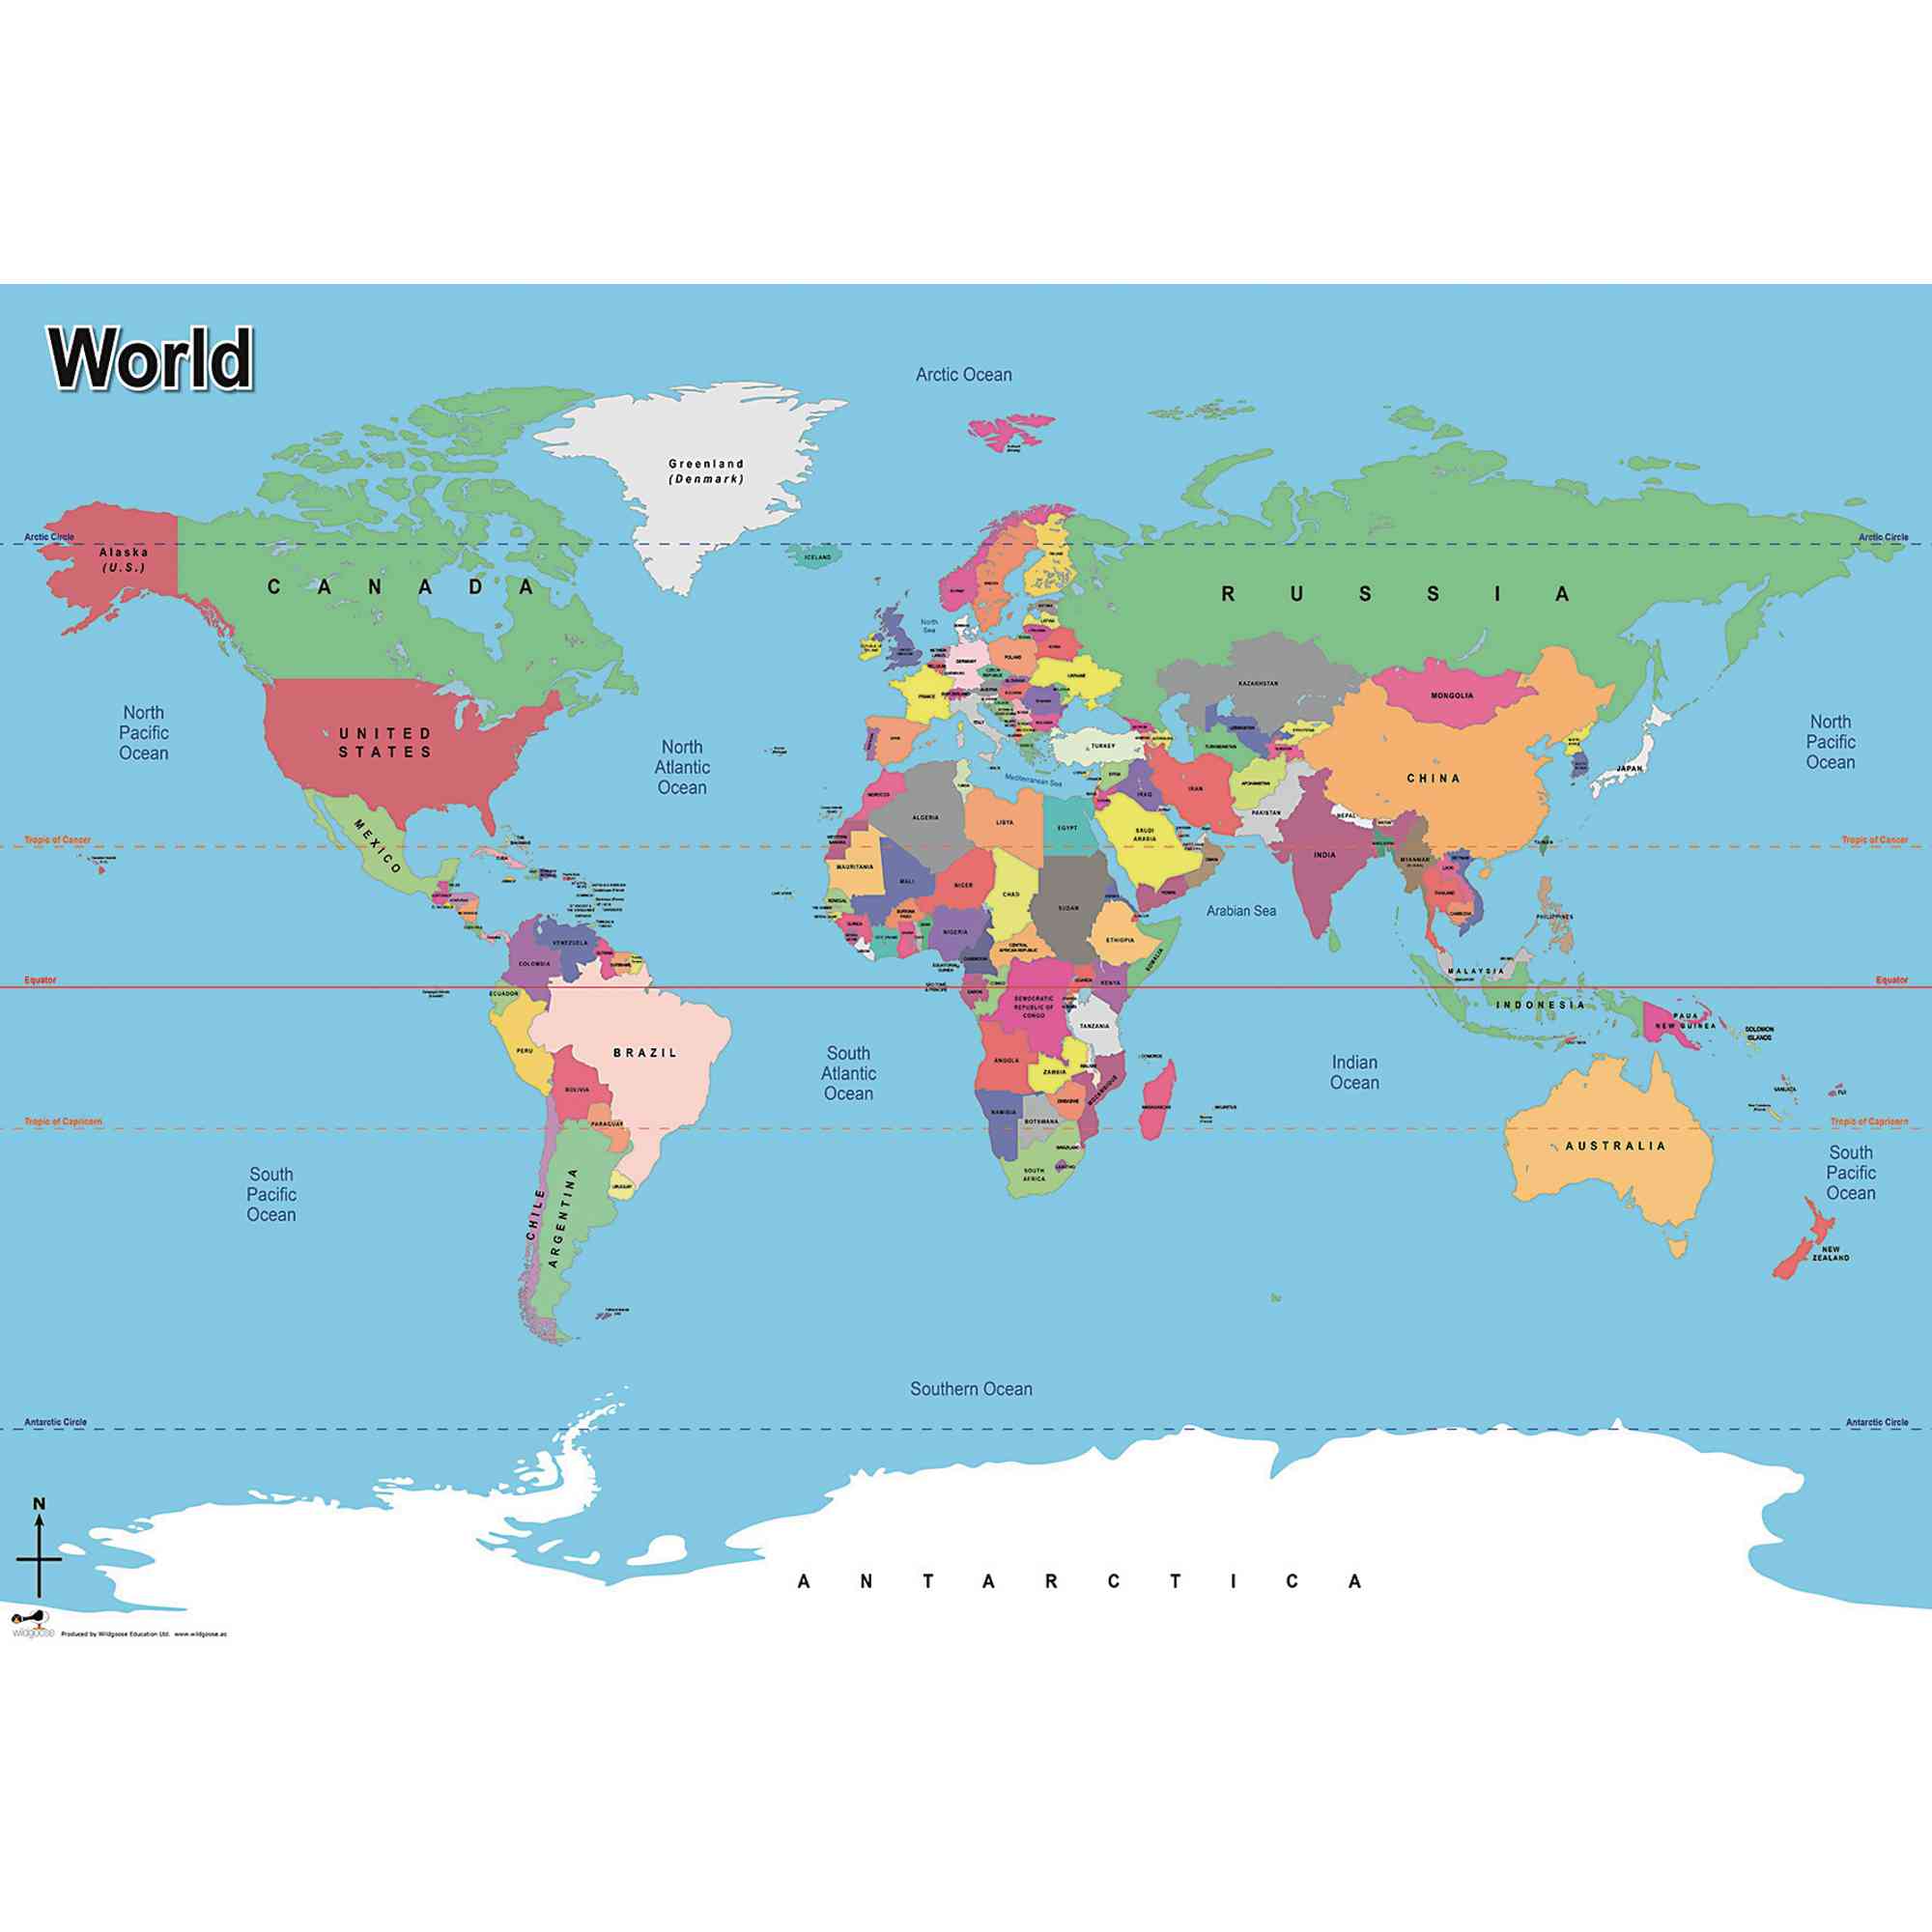 The map world of World map: